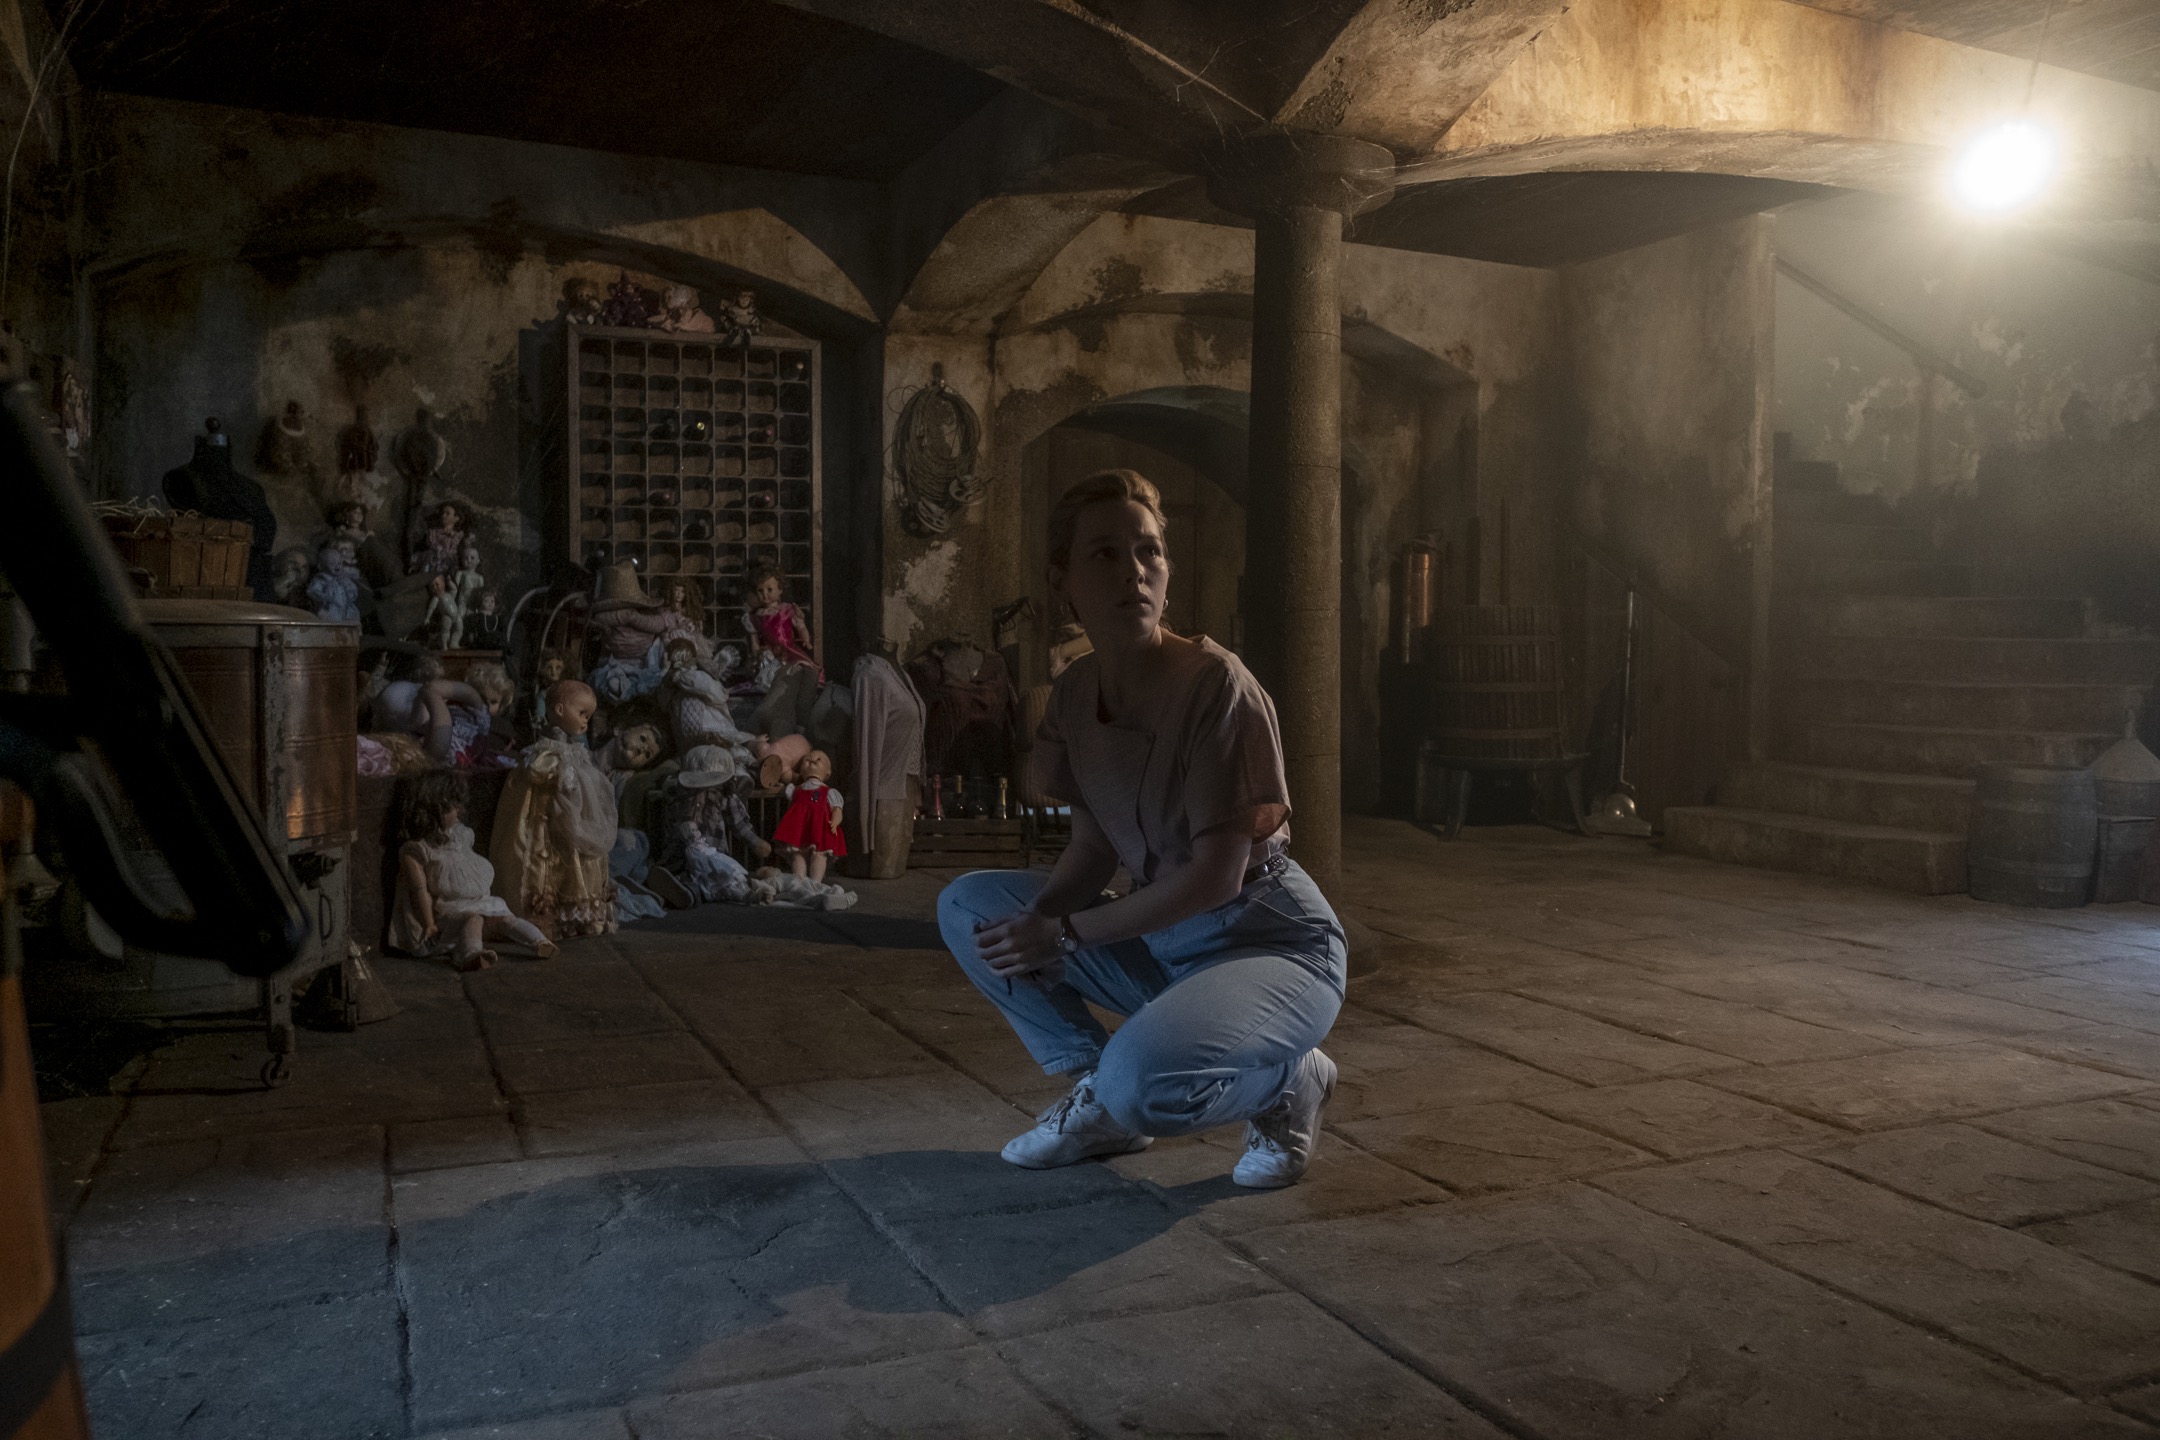 THE HAUNTING OF BLY MANOR (L to R) VICTORIA PEDRETTI as DANI in episode 102 of THE HAUNTING OF BLY MANOR Cr. EIKE SCHROTER/NETFLIX © 2020